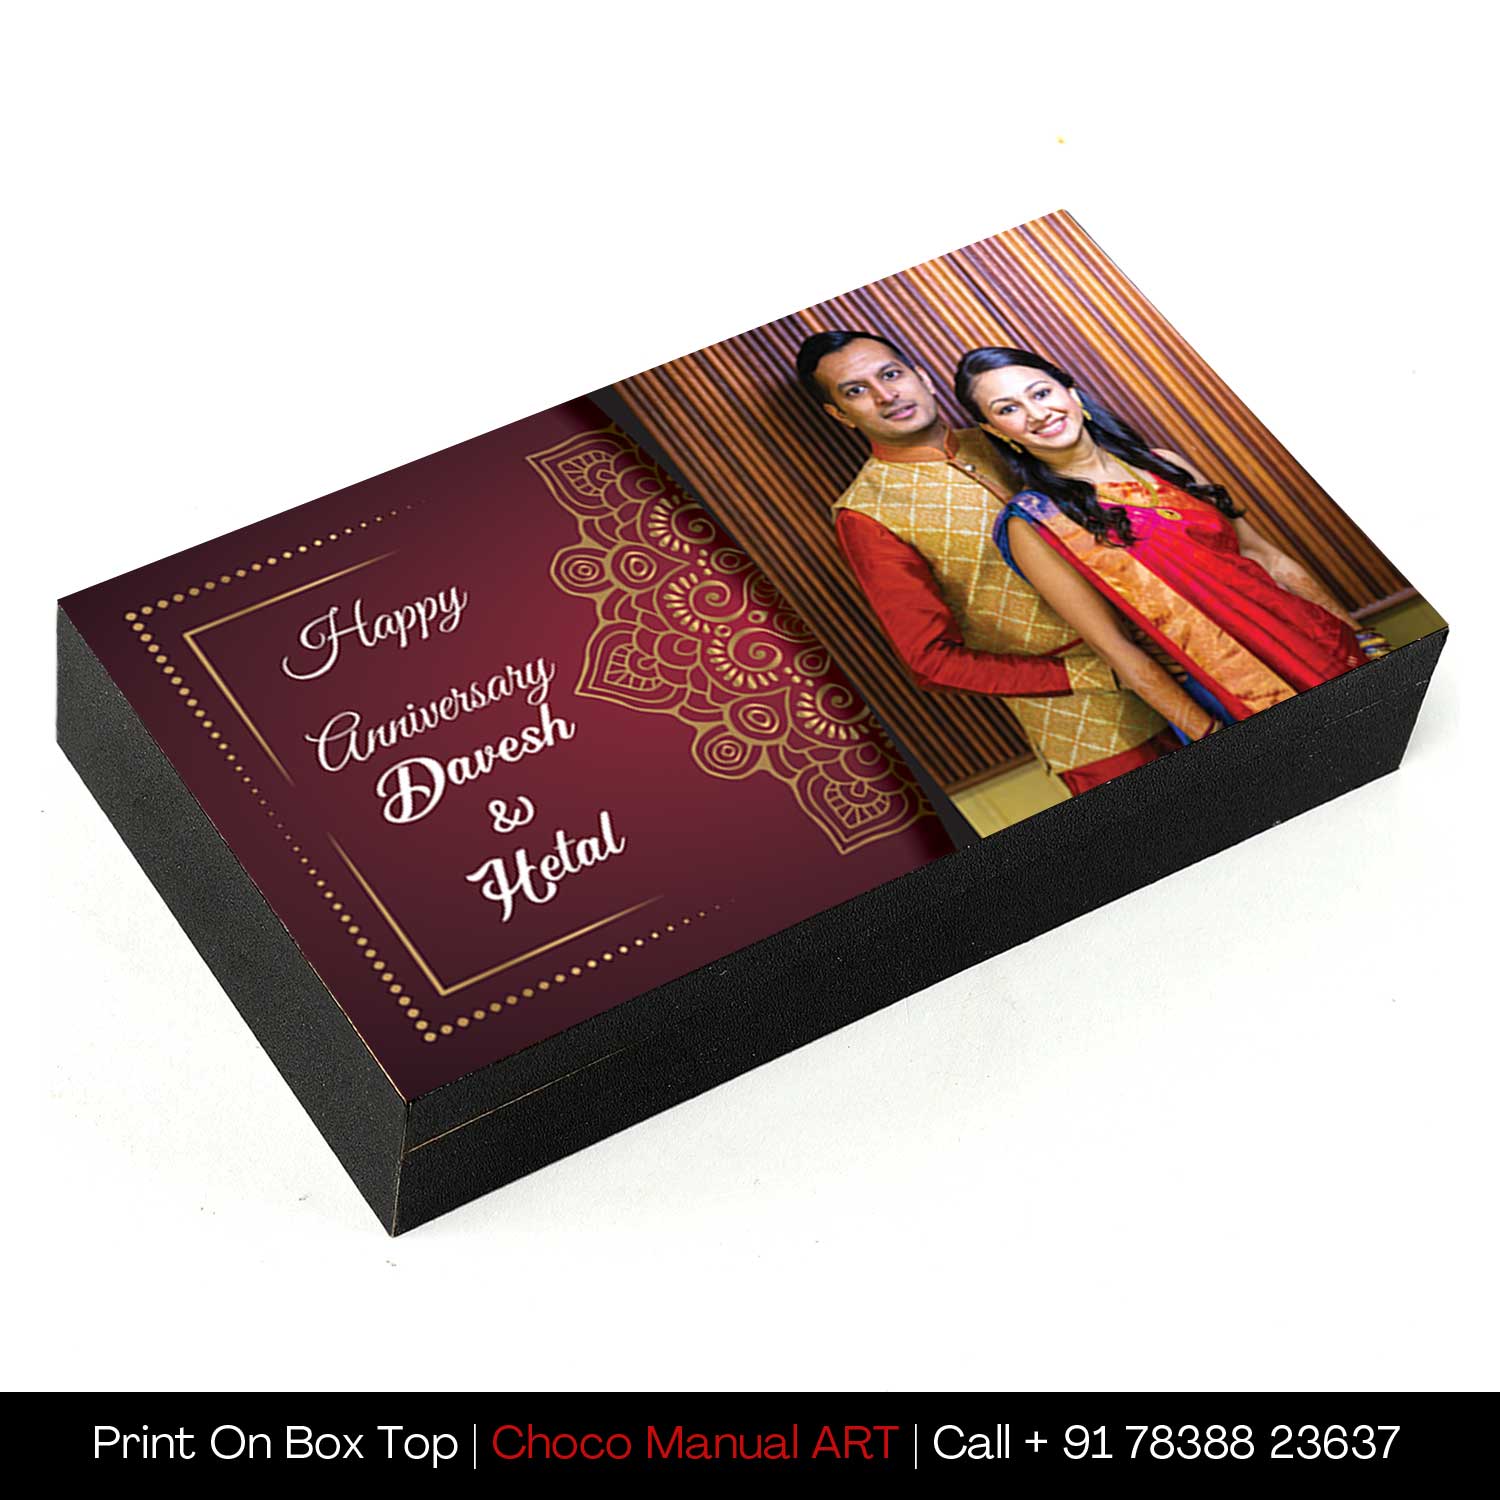 photo printed with elegant design on wooden box of chocolates